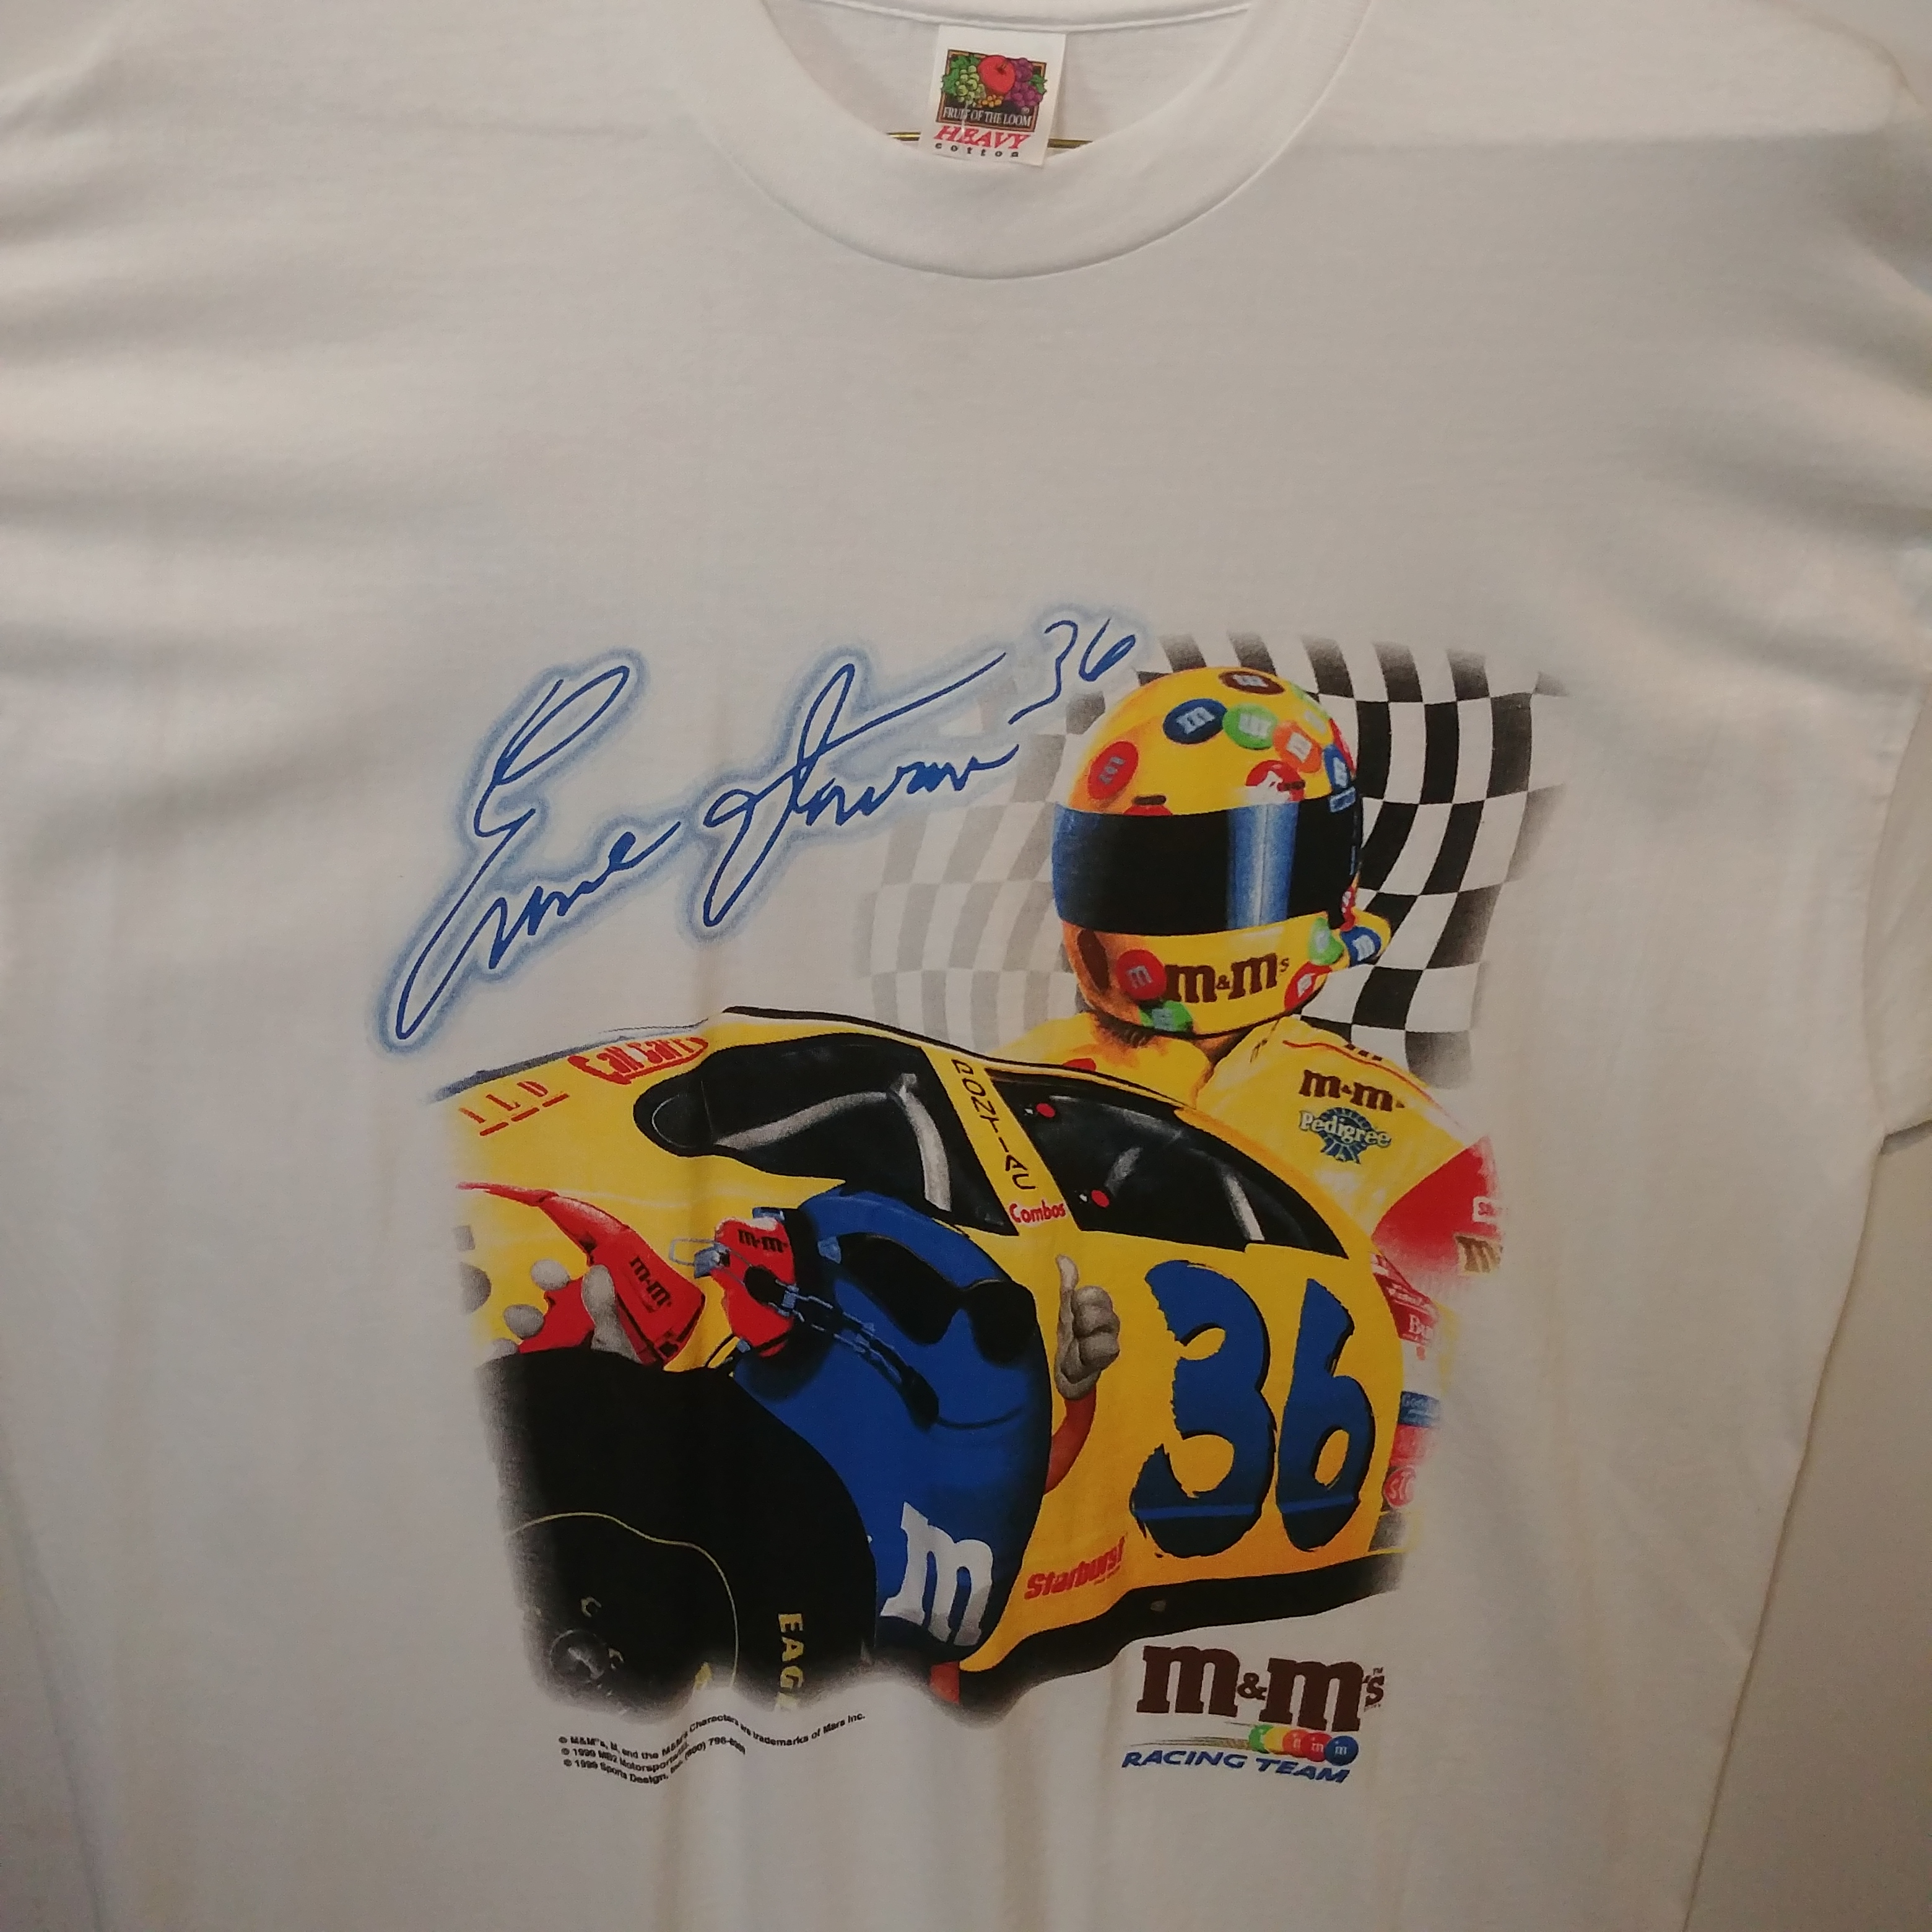 1999 Ernie Irvan M&M's "Get Used To The View" tee